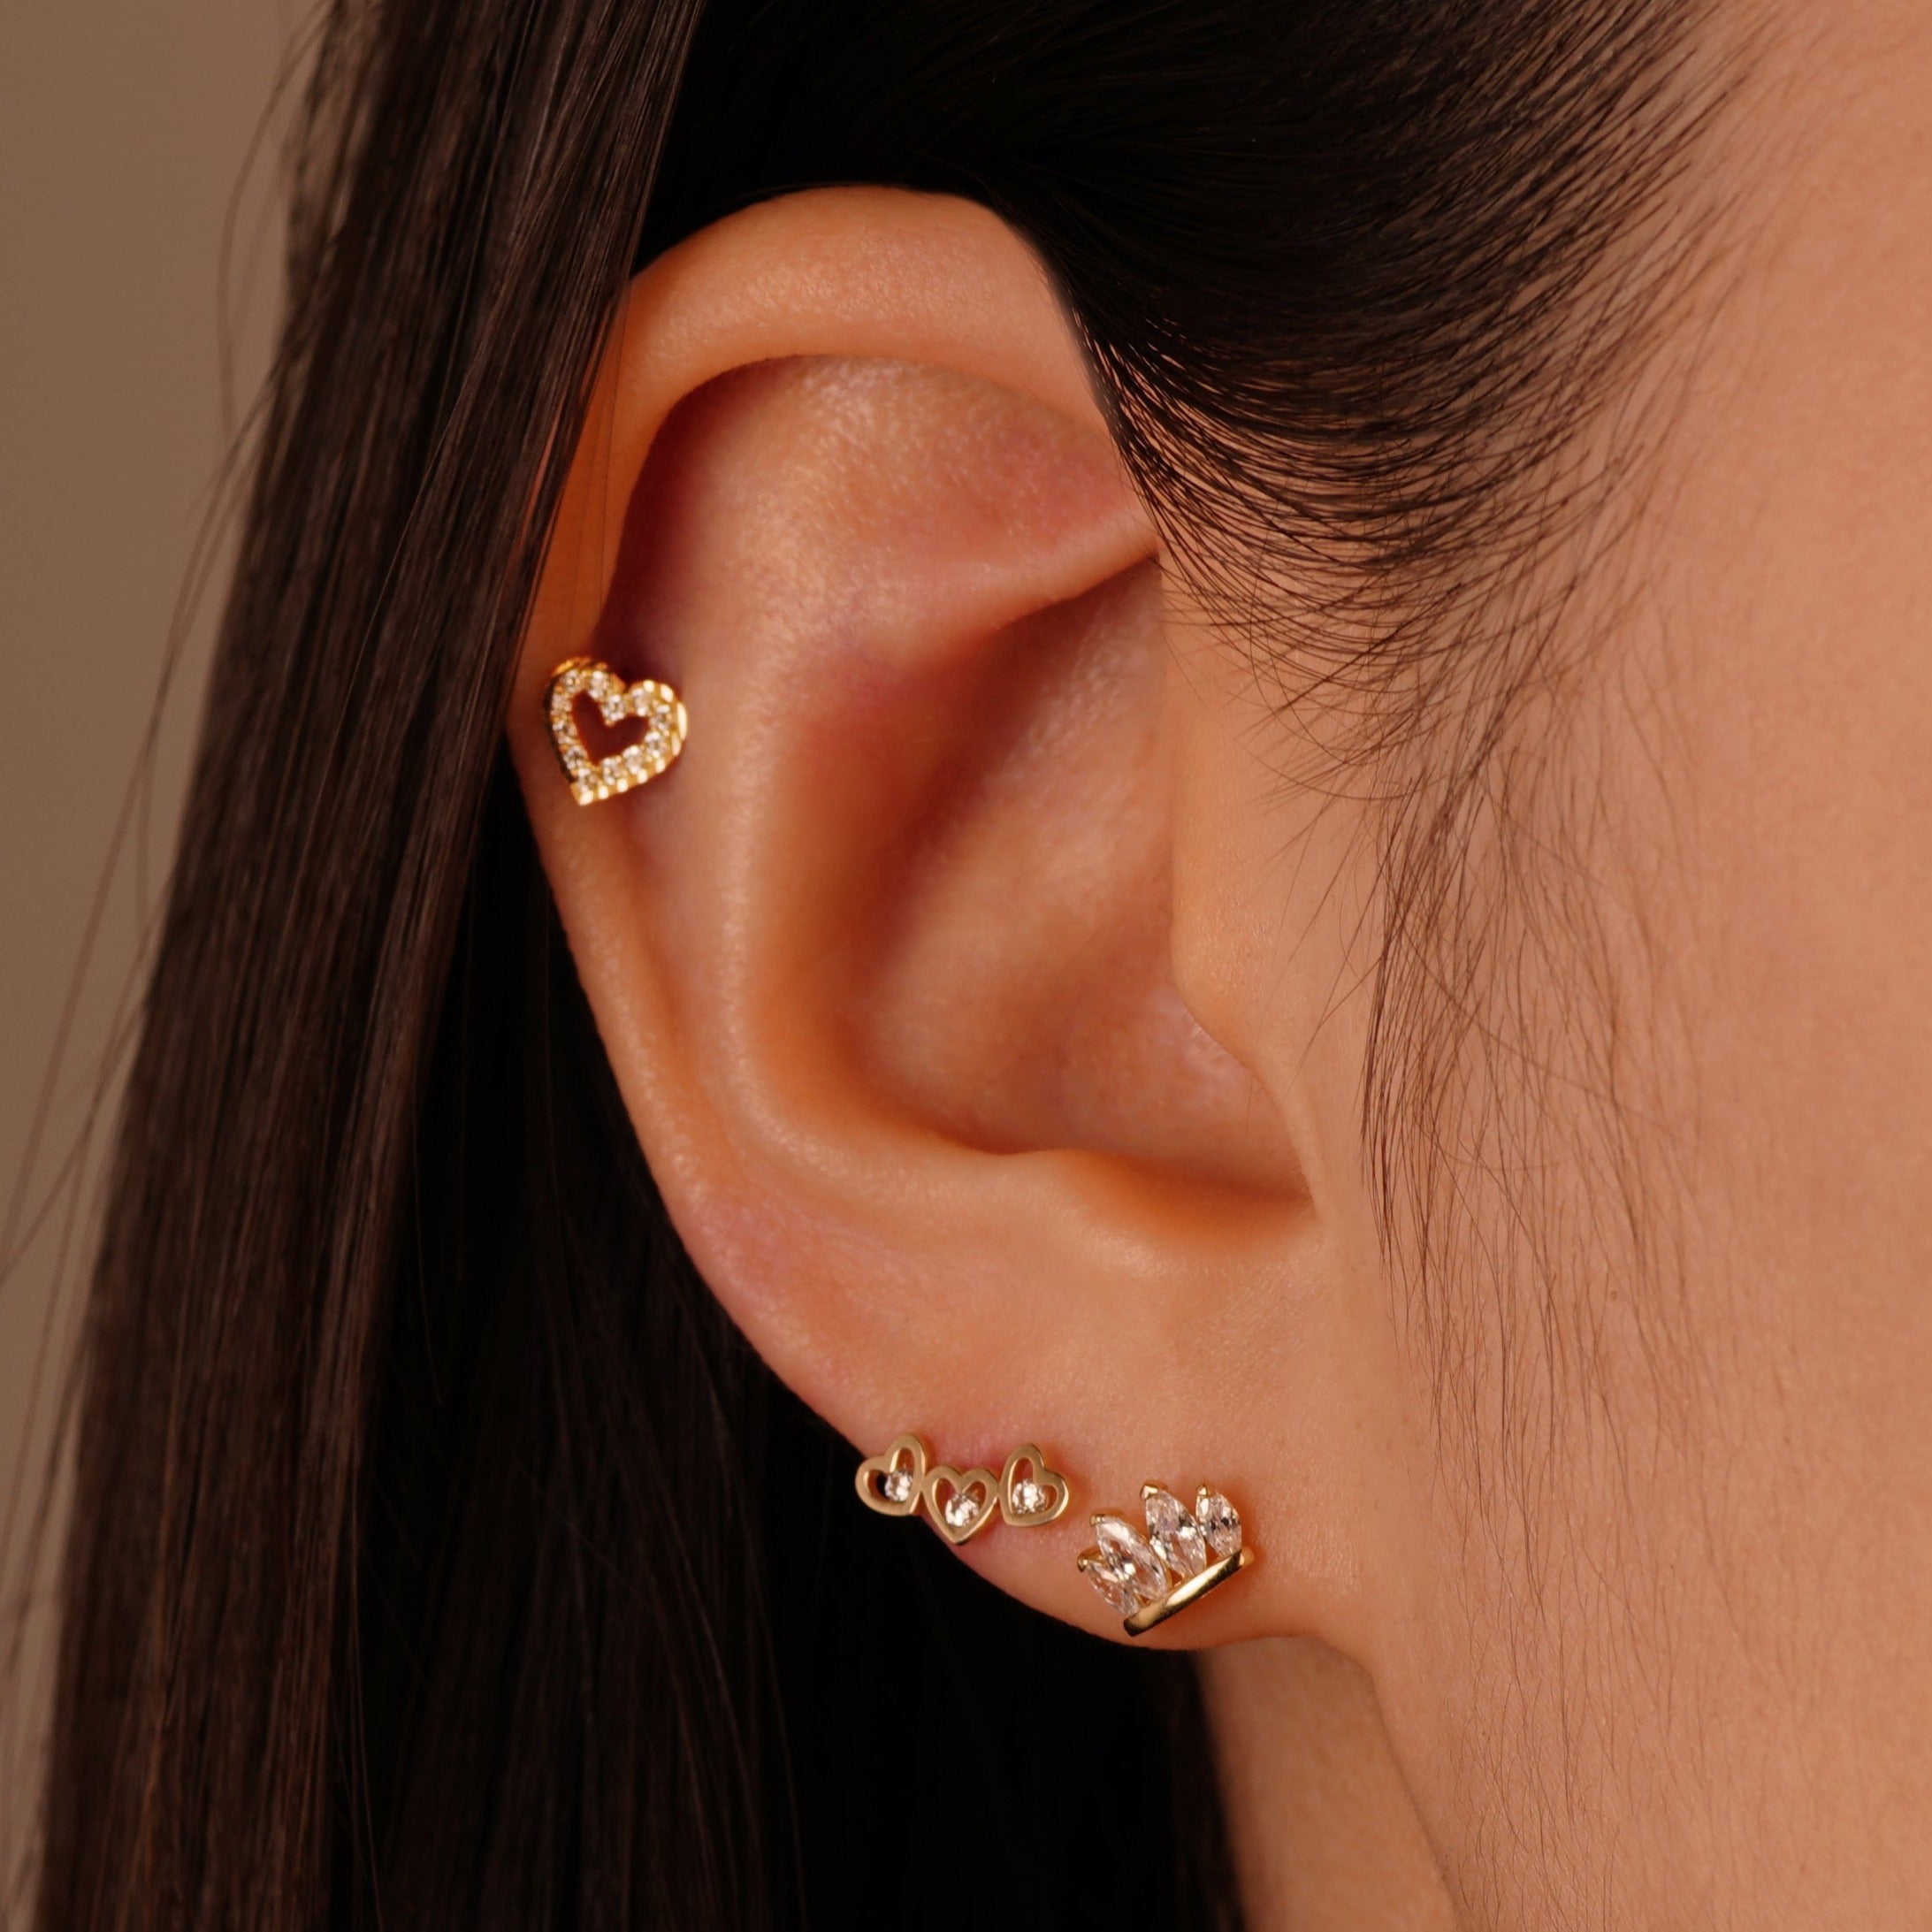 14K Solid Gold Cubic Zirconia Stone Triple Hearts Mini Stud Earrings - Anygolds 